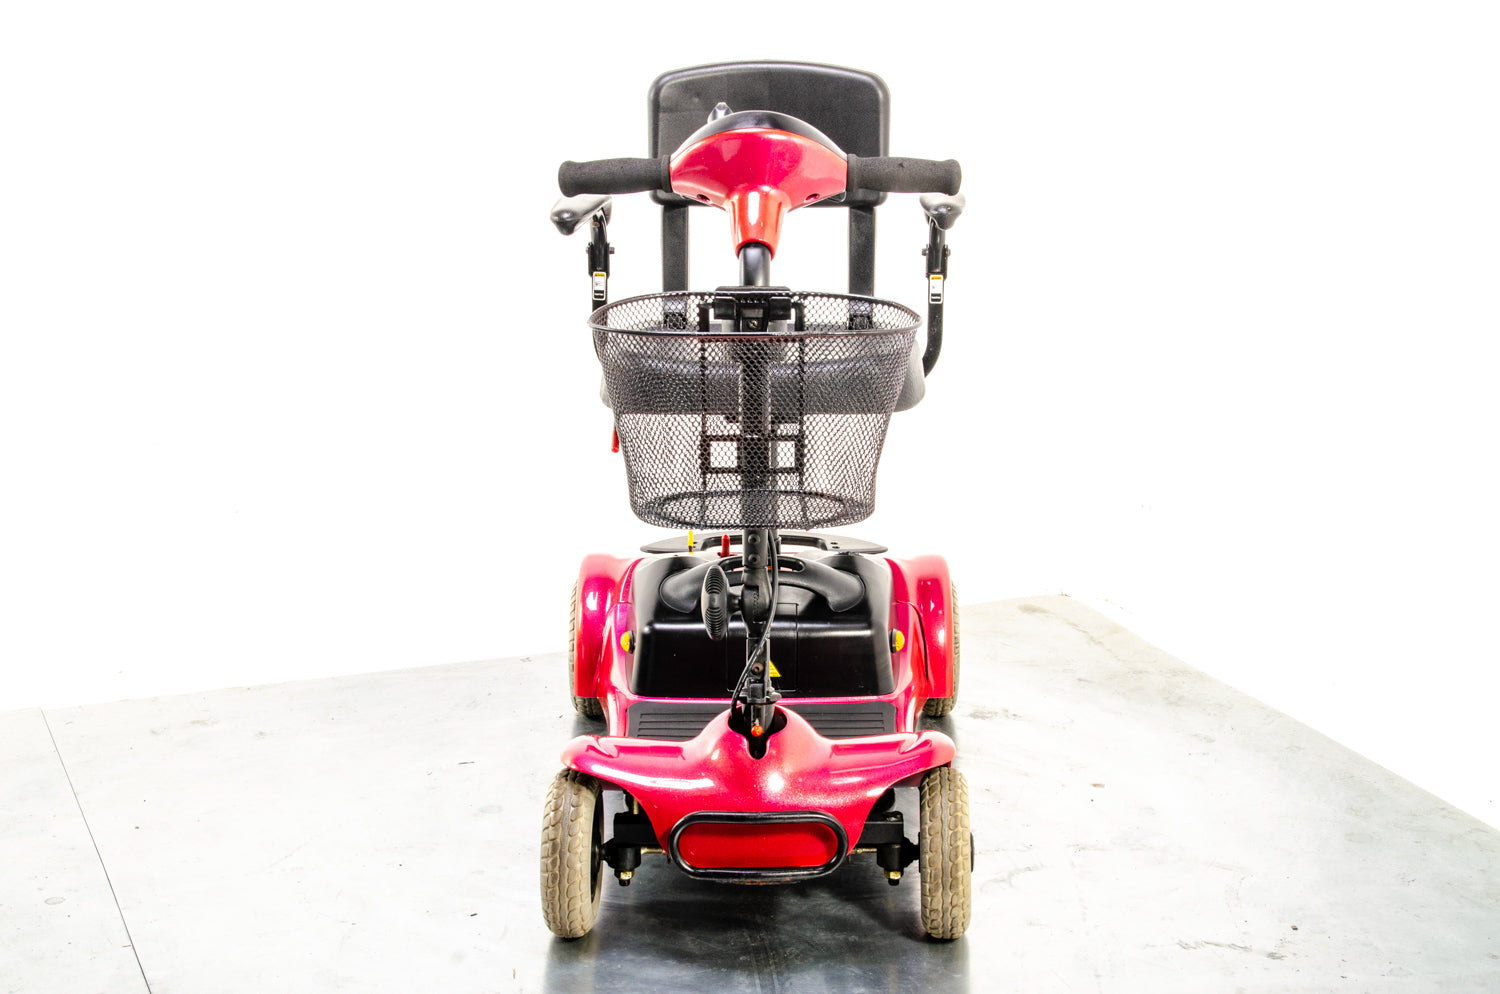 Sterling Little Gem Used Mobility Scooter Small Transportable Lightweight Portable Travel Sunrise Medical Pink